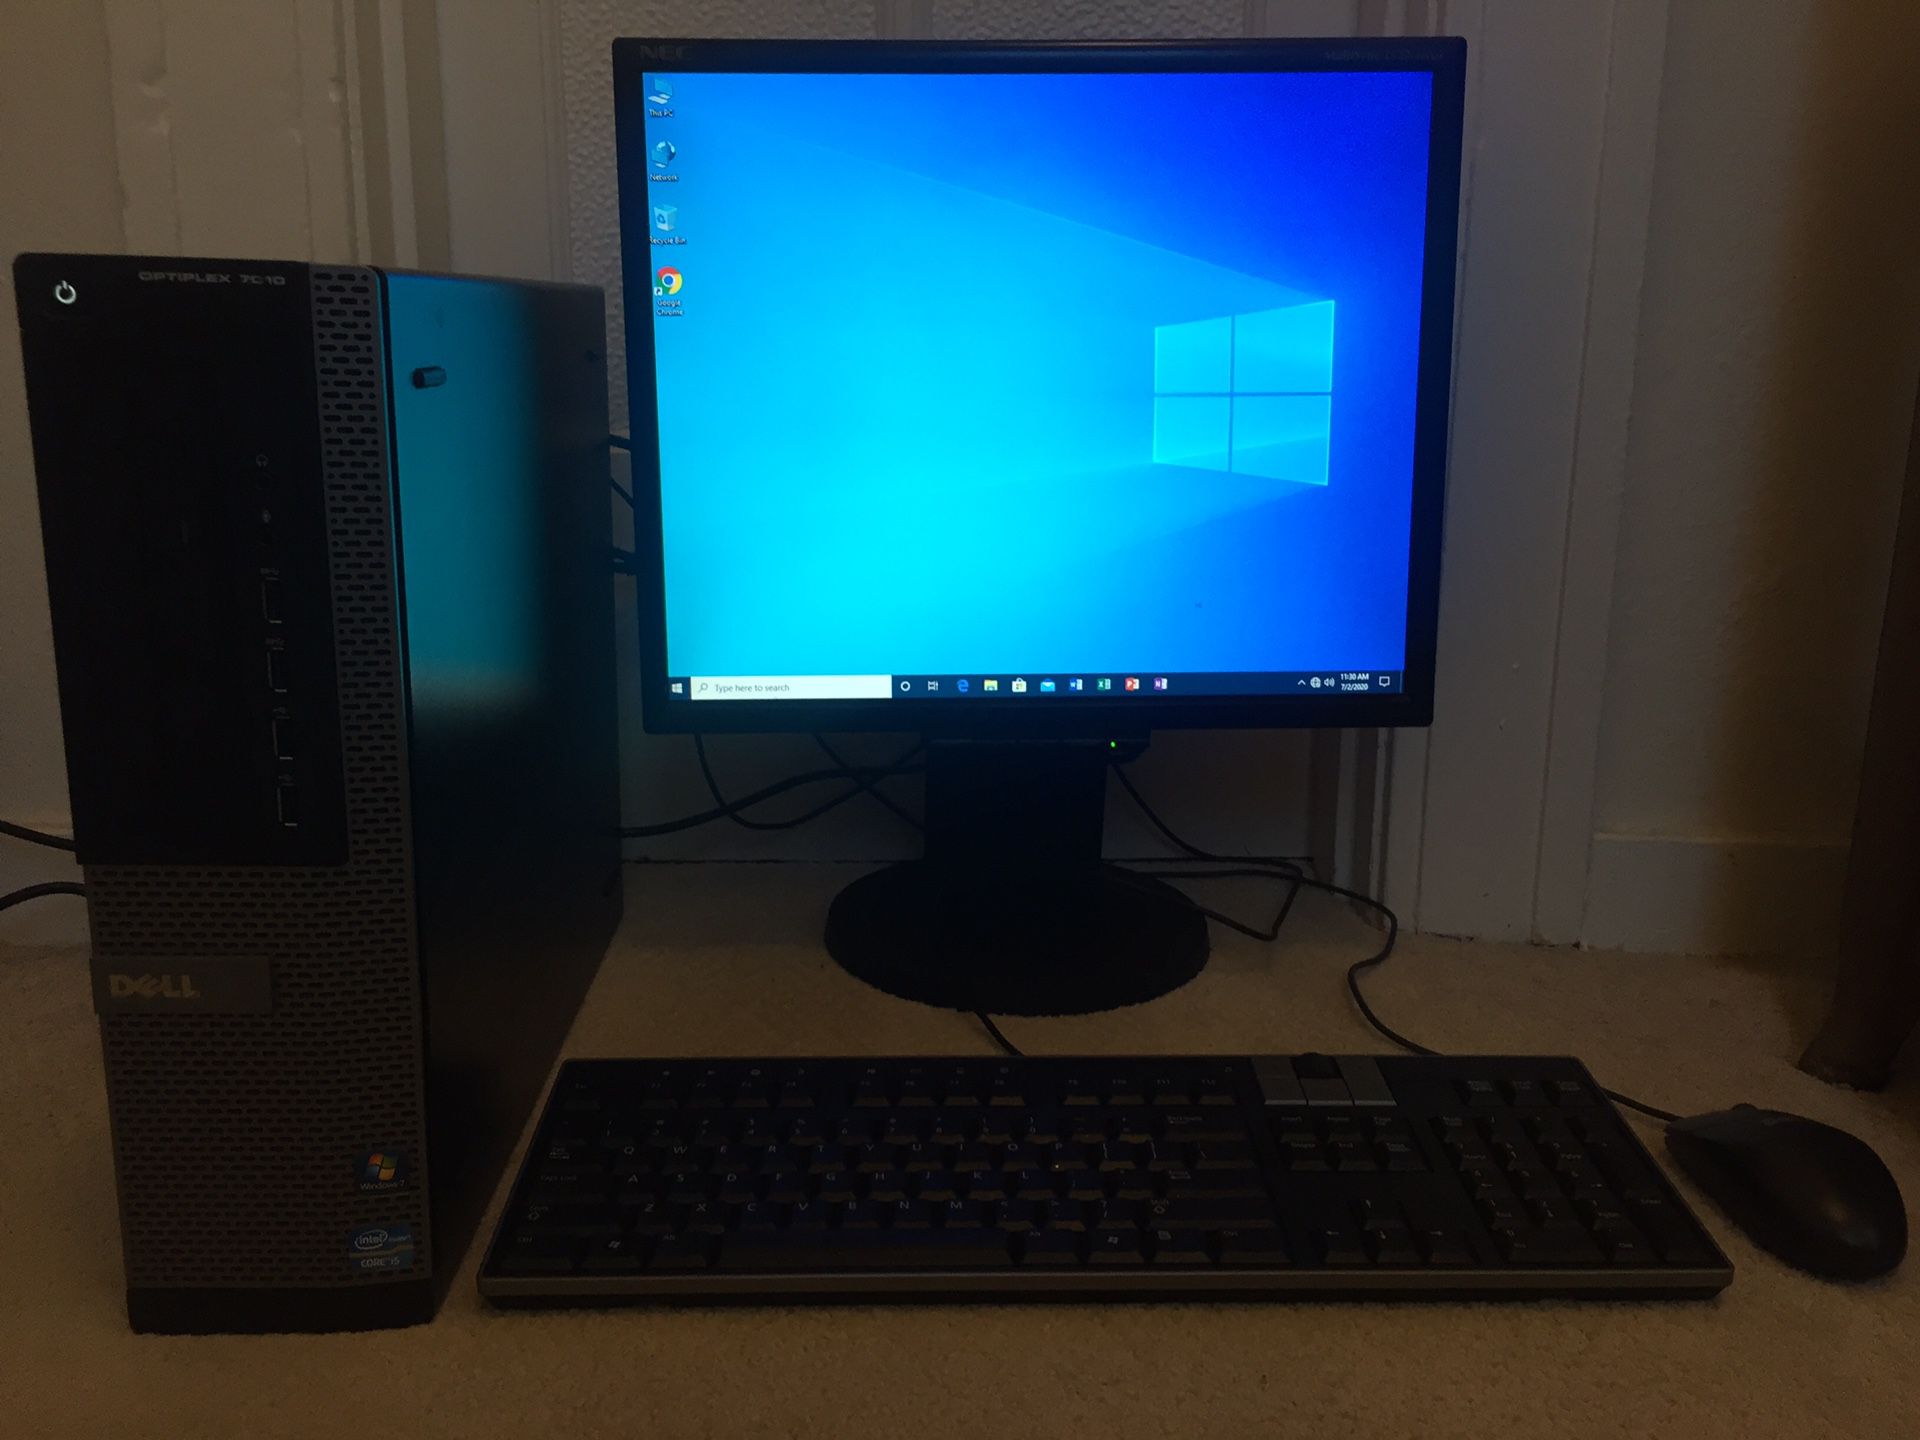 Dell Optiplex 7010 Desktop w/ 20” Monitor, Mouse, and Keyboard